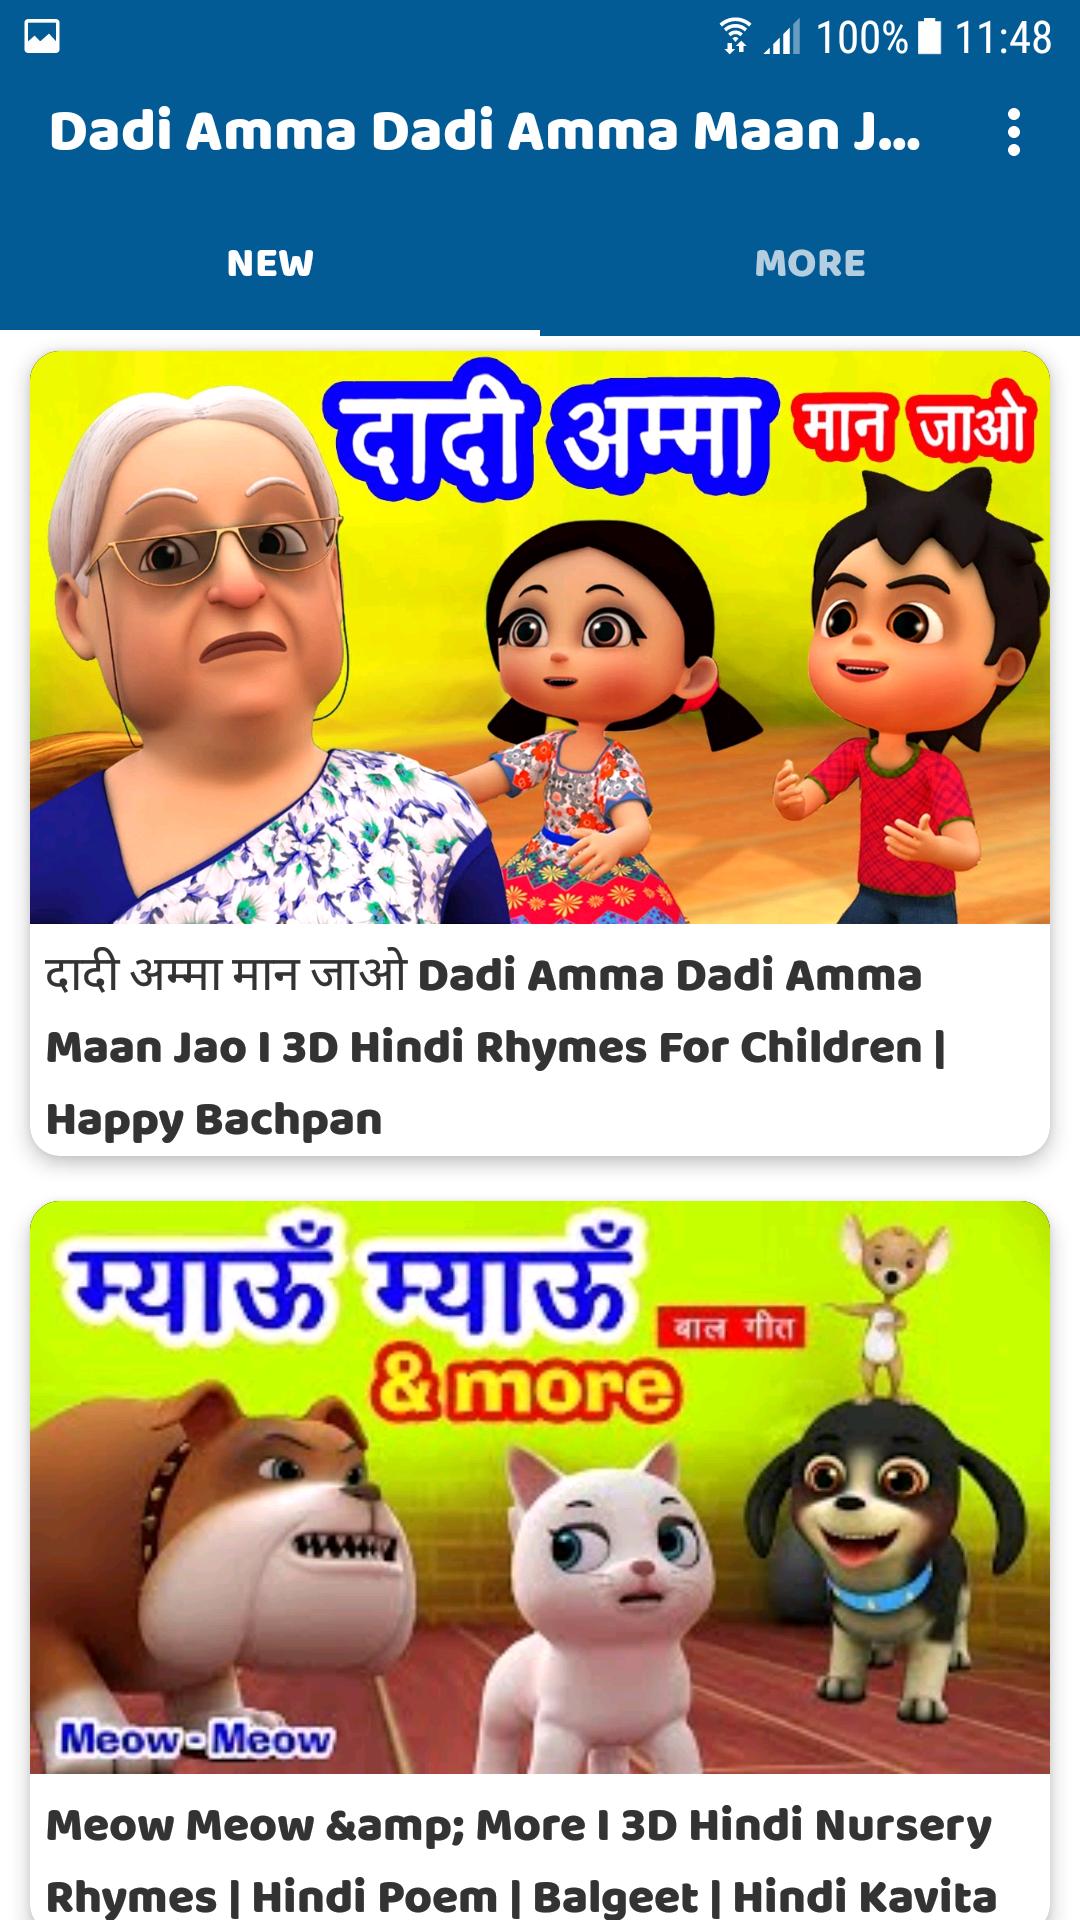 Dadi Amma Dadi Amma Maan Jao poem - Video for Kids APK pour Android  Télécharger